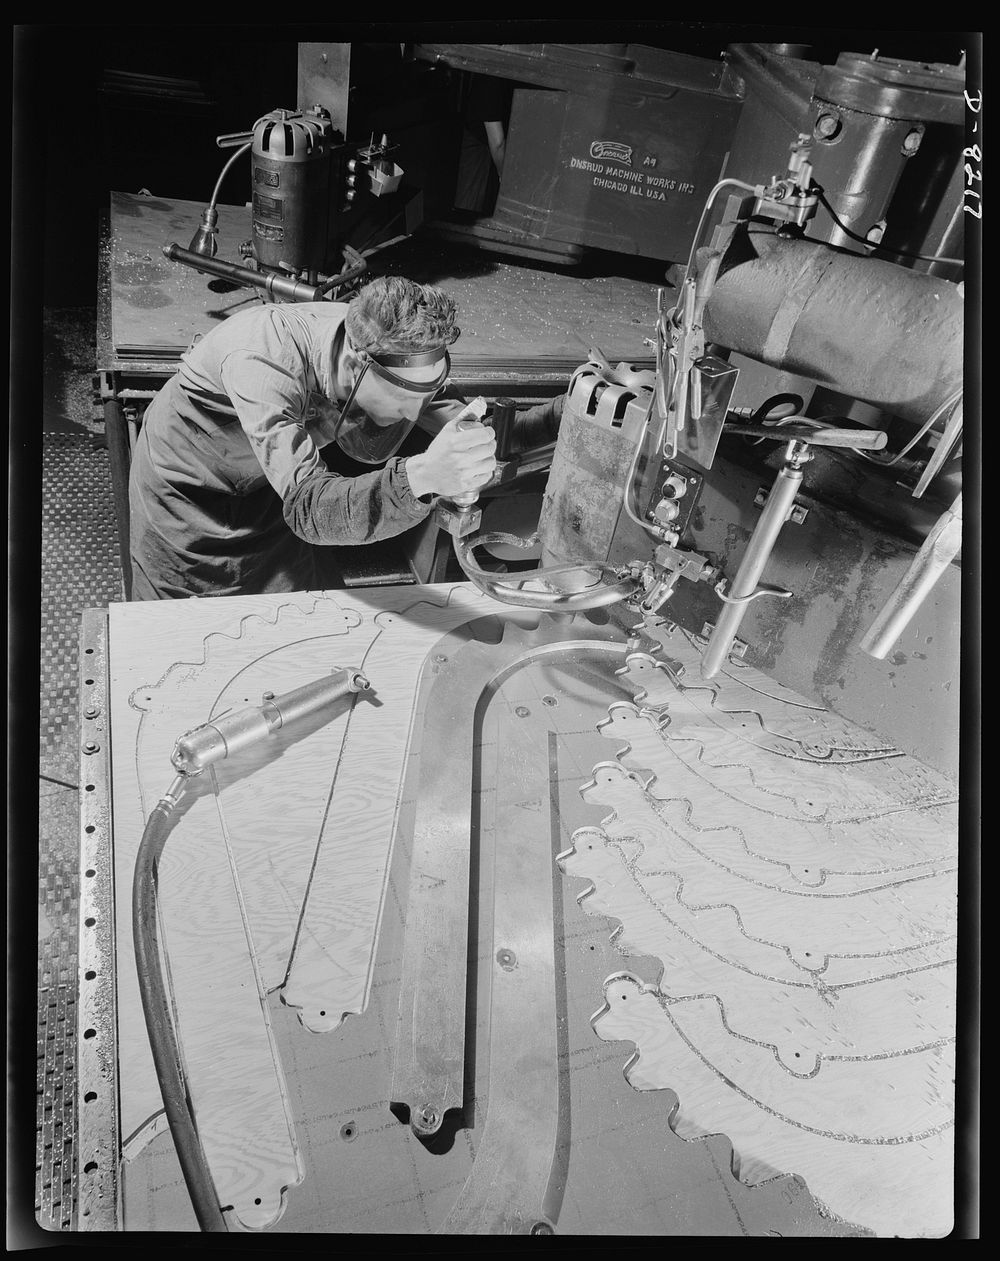 Production. B-17 heavy bomber. Parts for a new B-17F (Flying Fortress) bomber are cut on a routing machine in the Boeing…